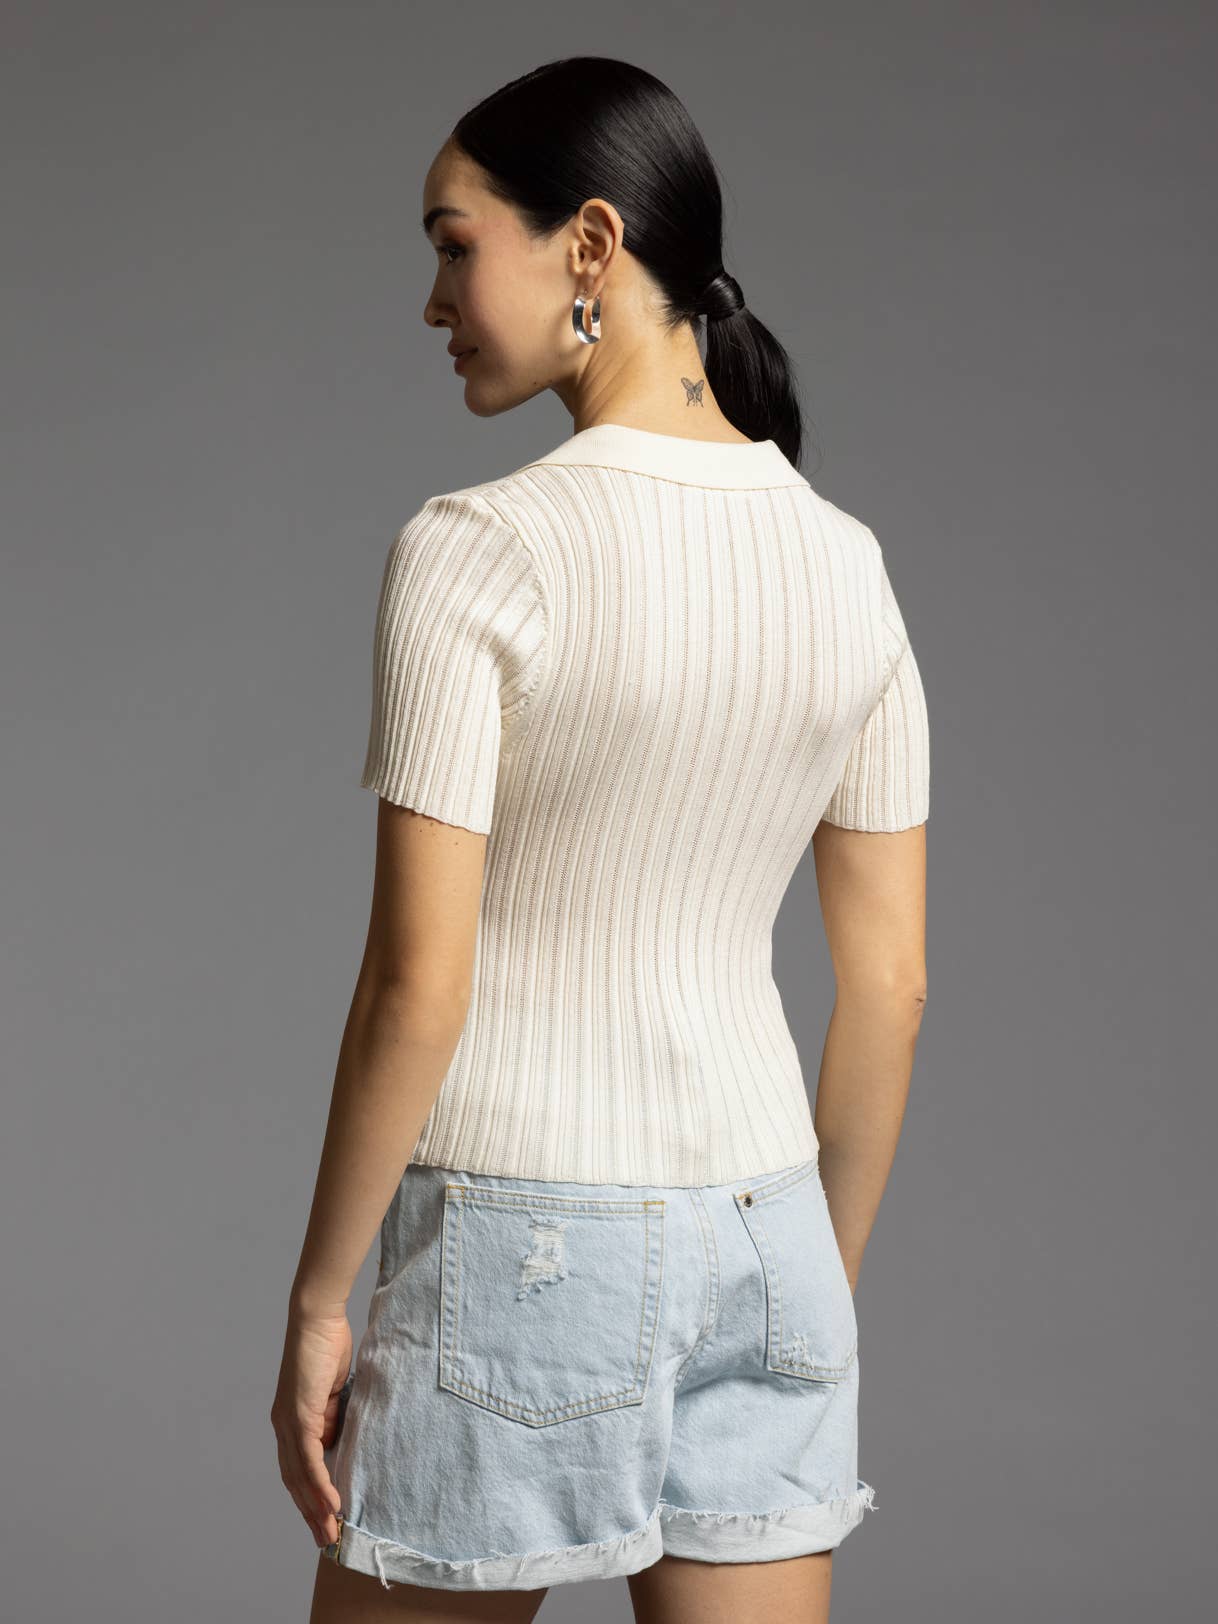 The Courtney Top